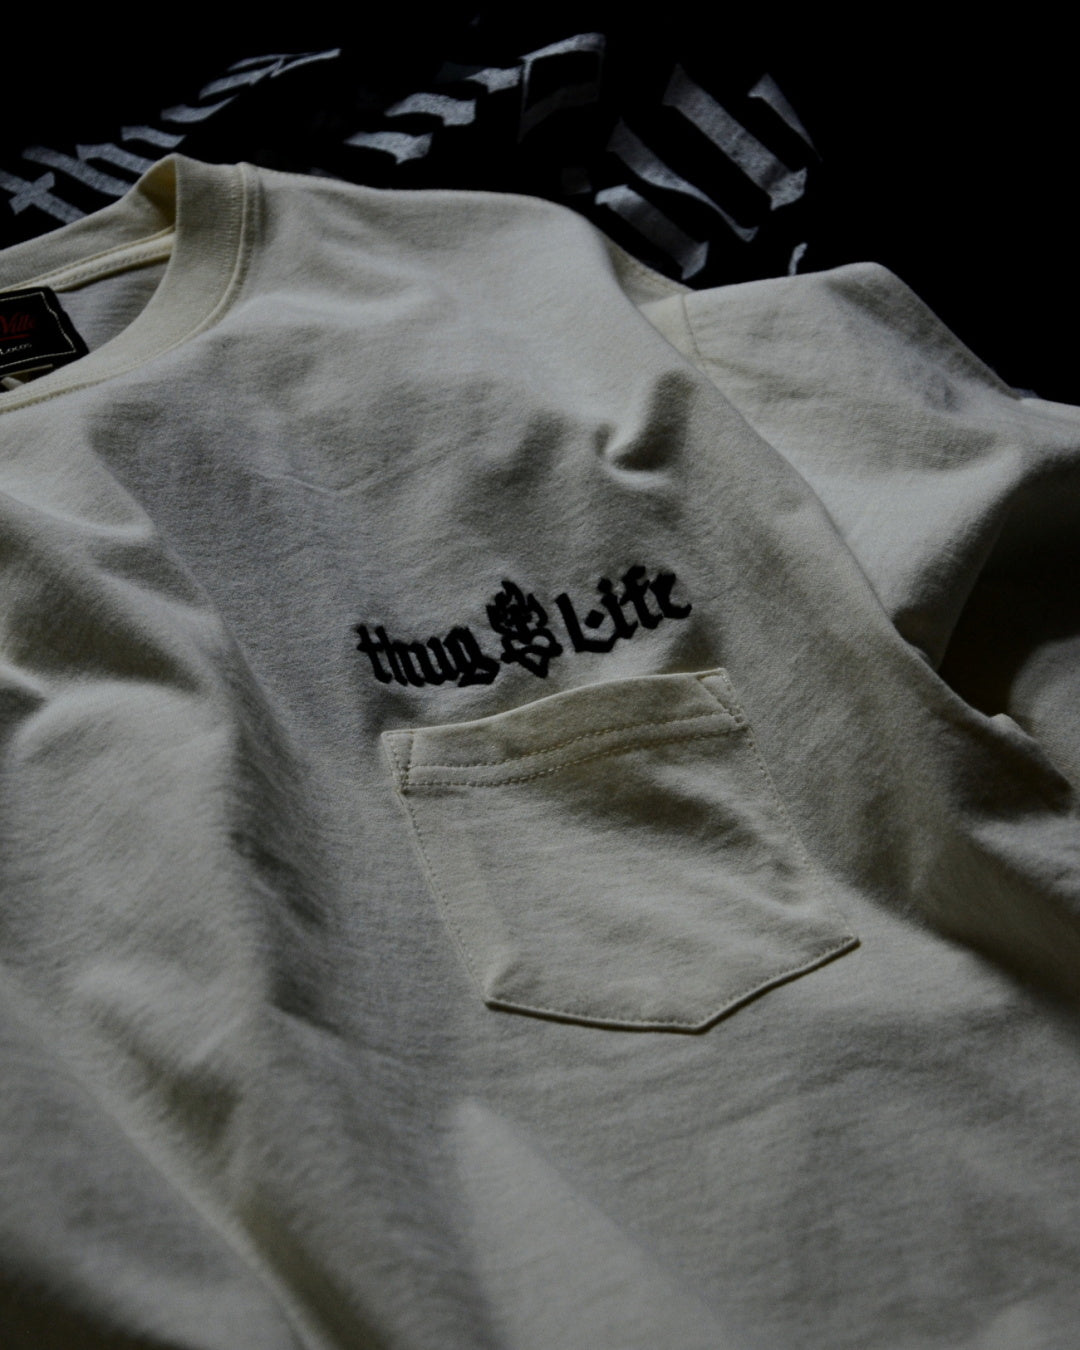 GANGSTERVILLE | SACRED HEART - L/S T-SHIRTS - White